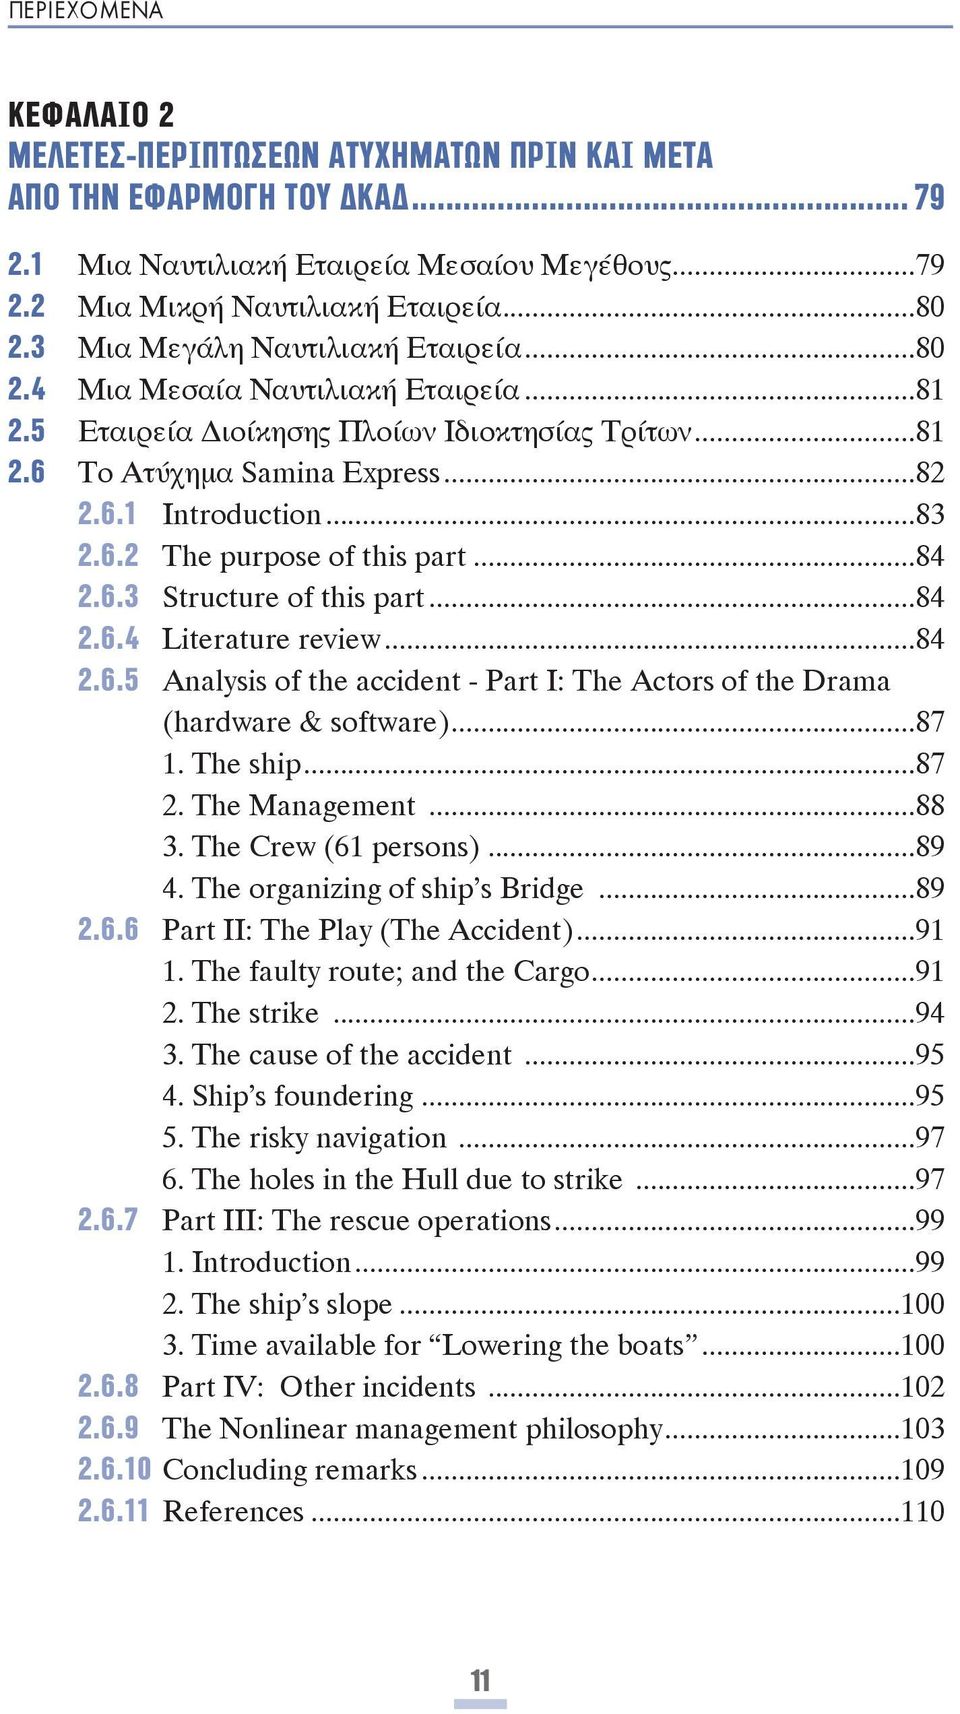 ..84 2.6.3 Structure of this part...84 2.6.4 Literature review...84 2.6.5 Analysis of the accident - Part I: The Actors of the Drama (hardware & software)...87 1. The ship...87 2. The Management...88 3.